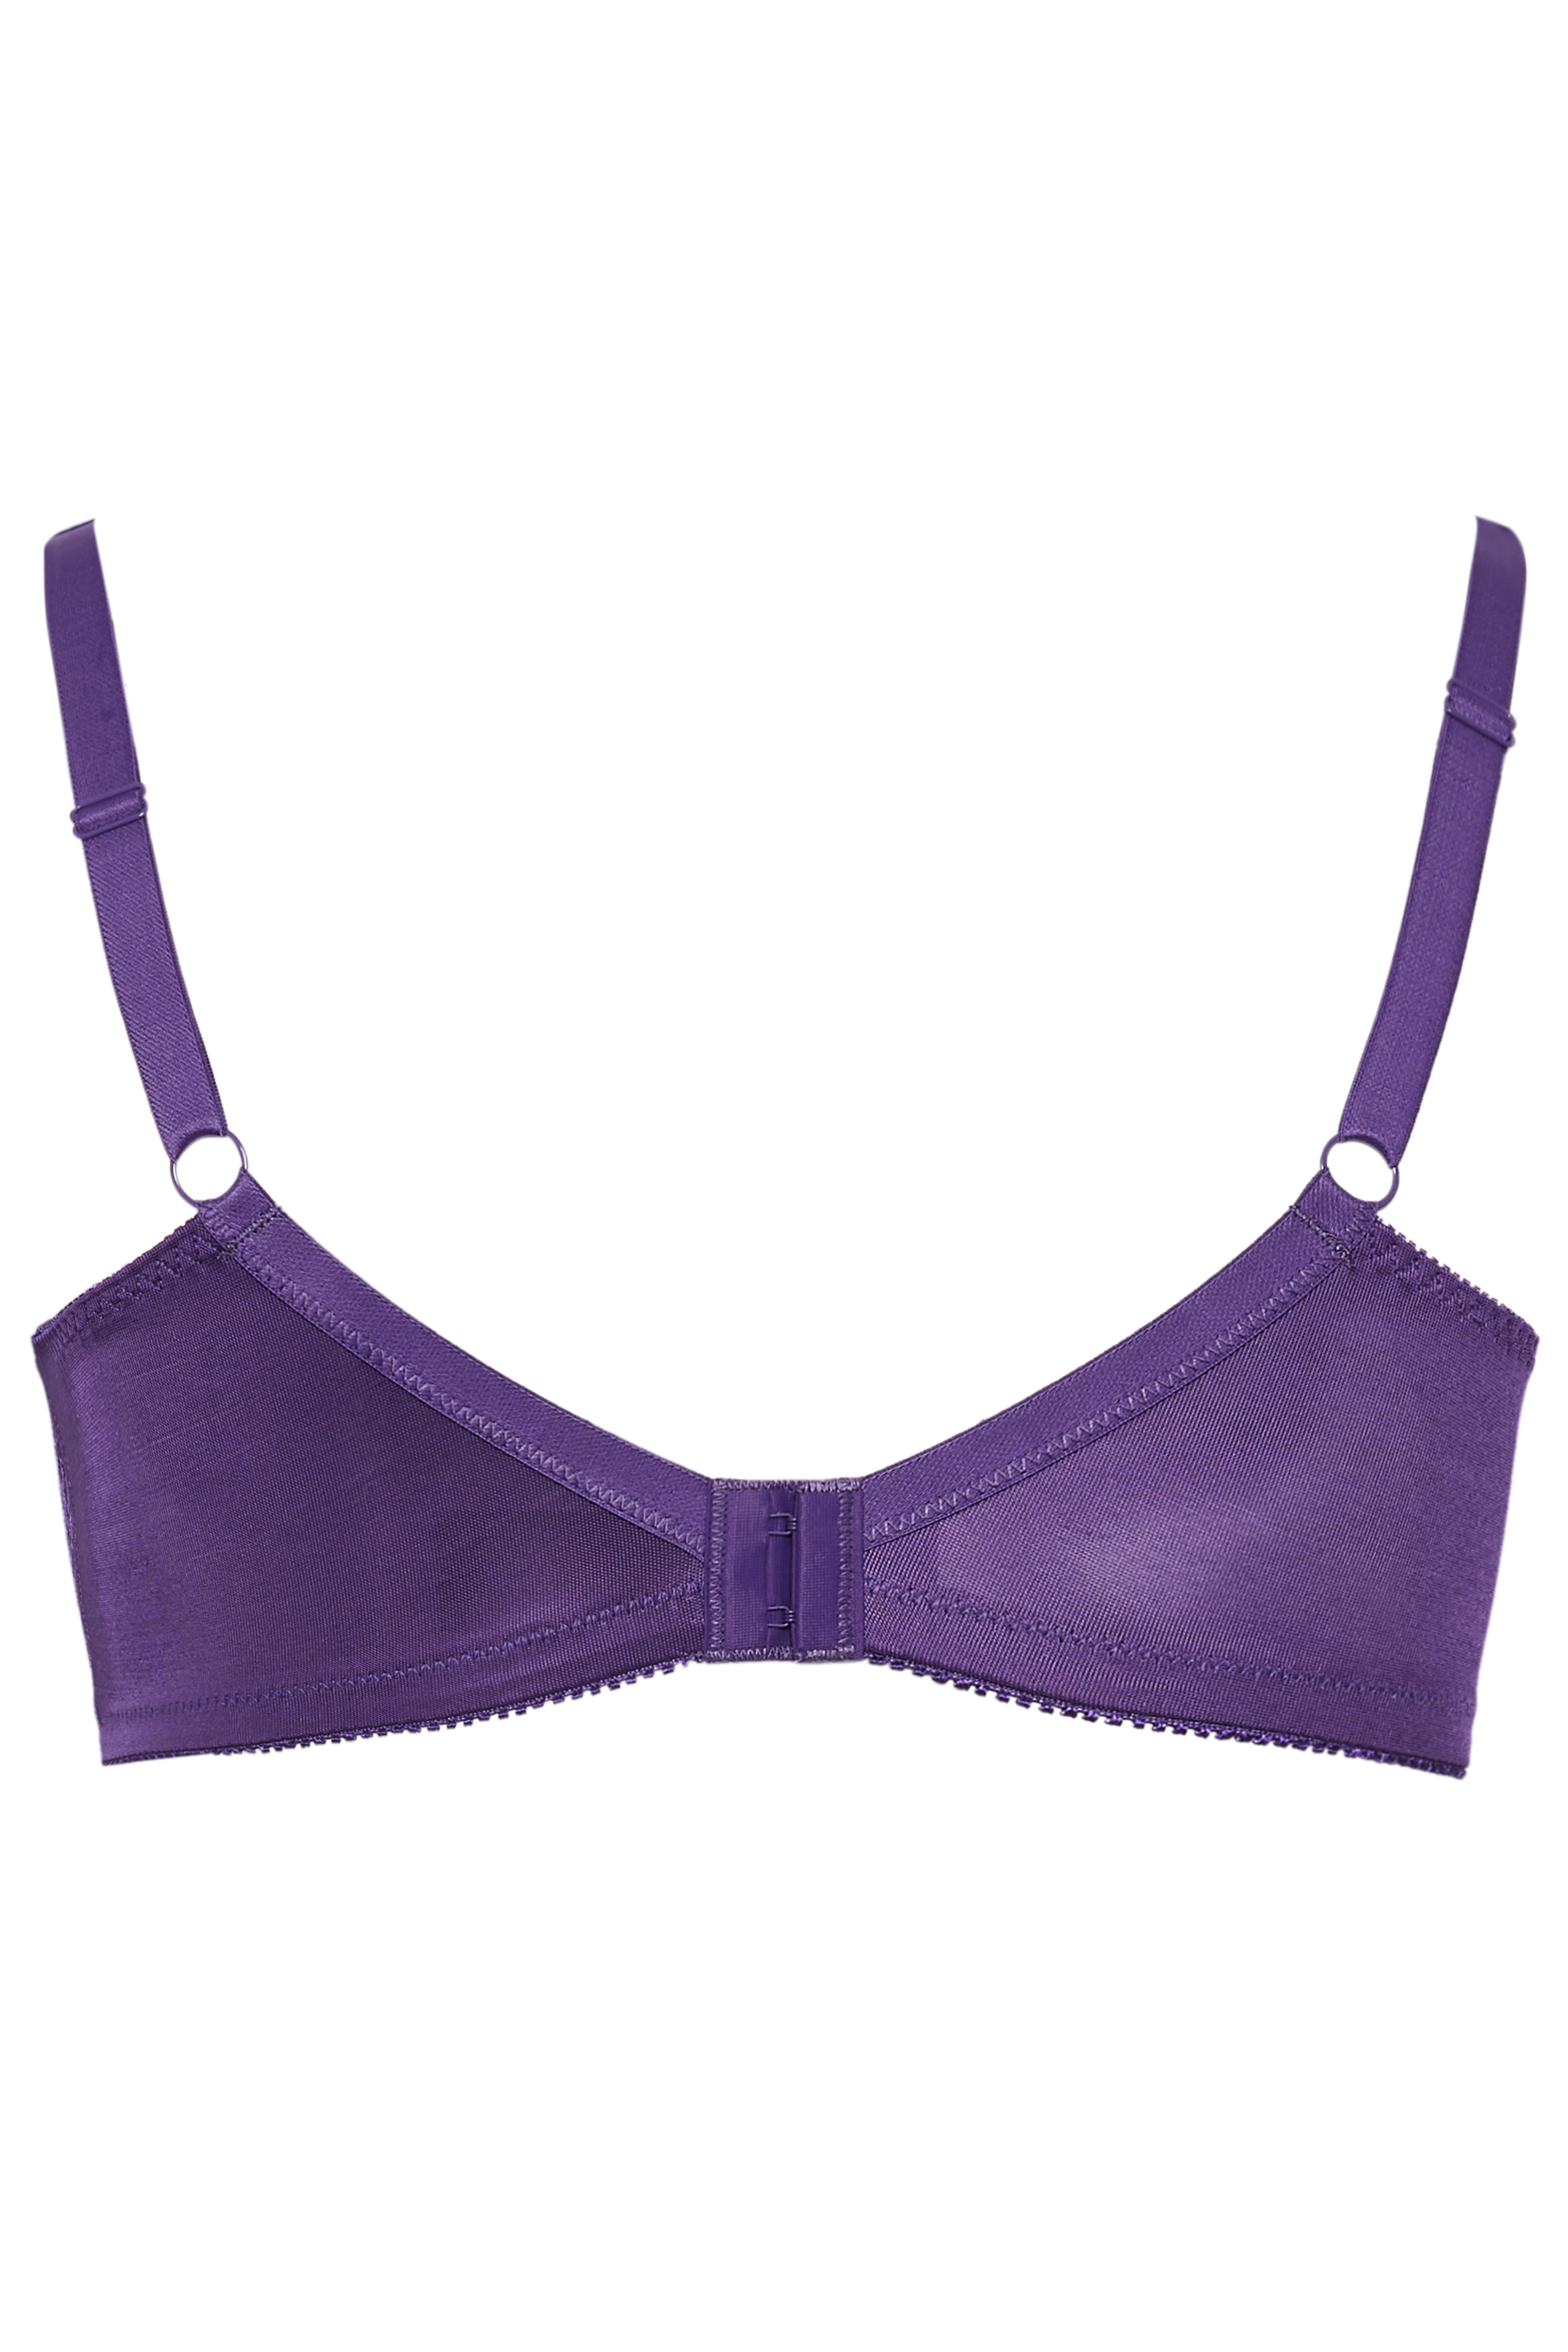 Lady Love Lingerie Purple Non-wired Non-Padded Bra LLBR1013